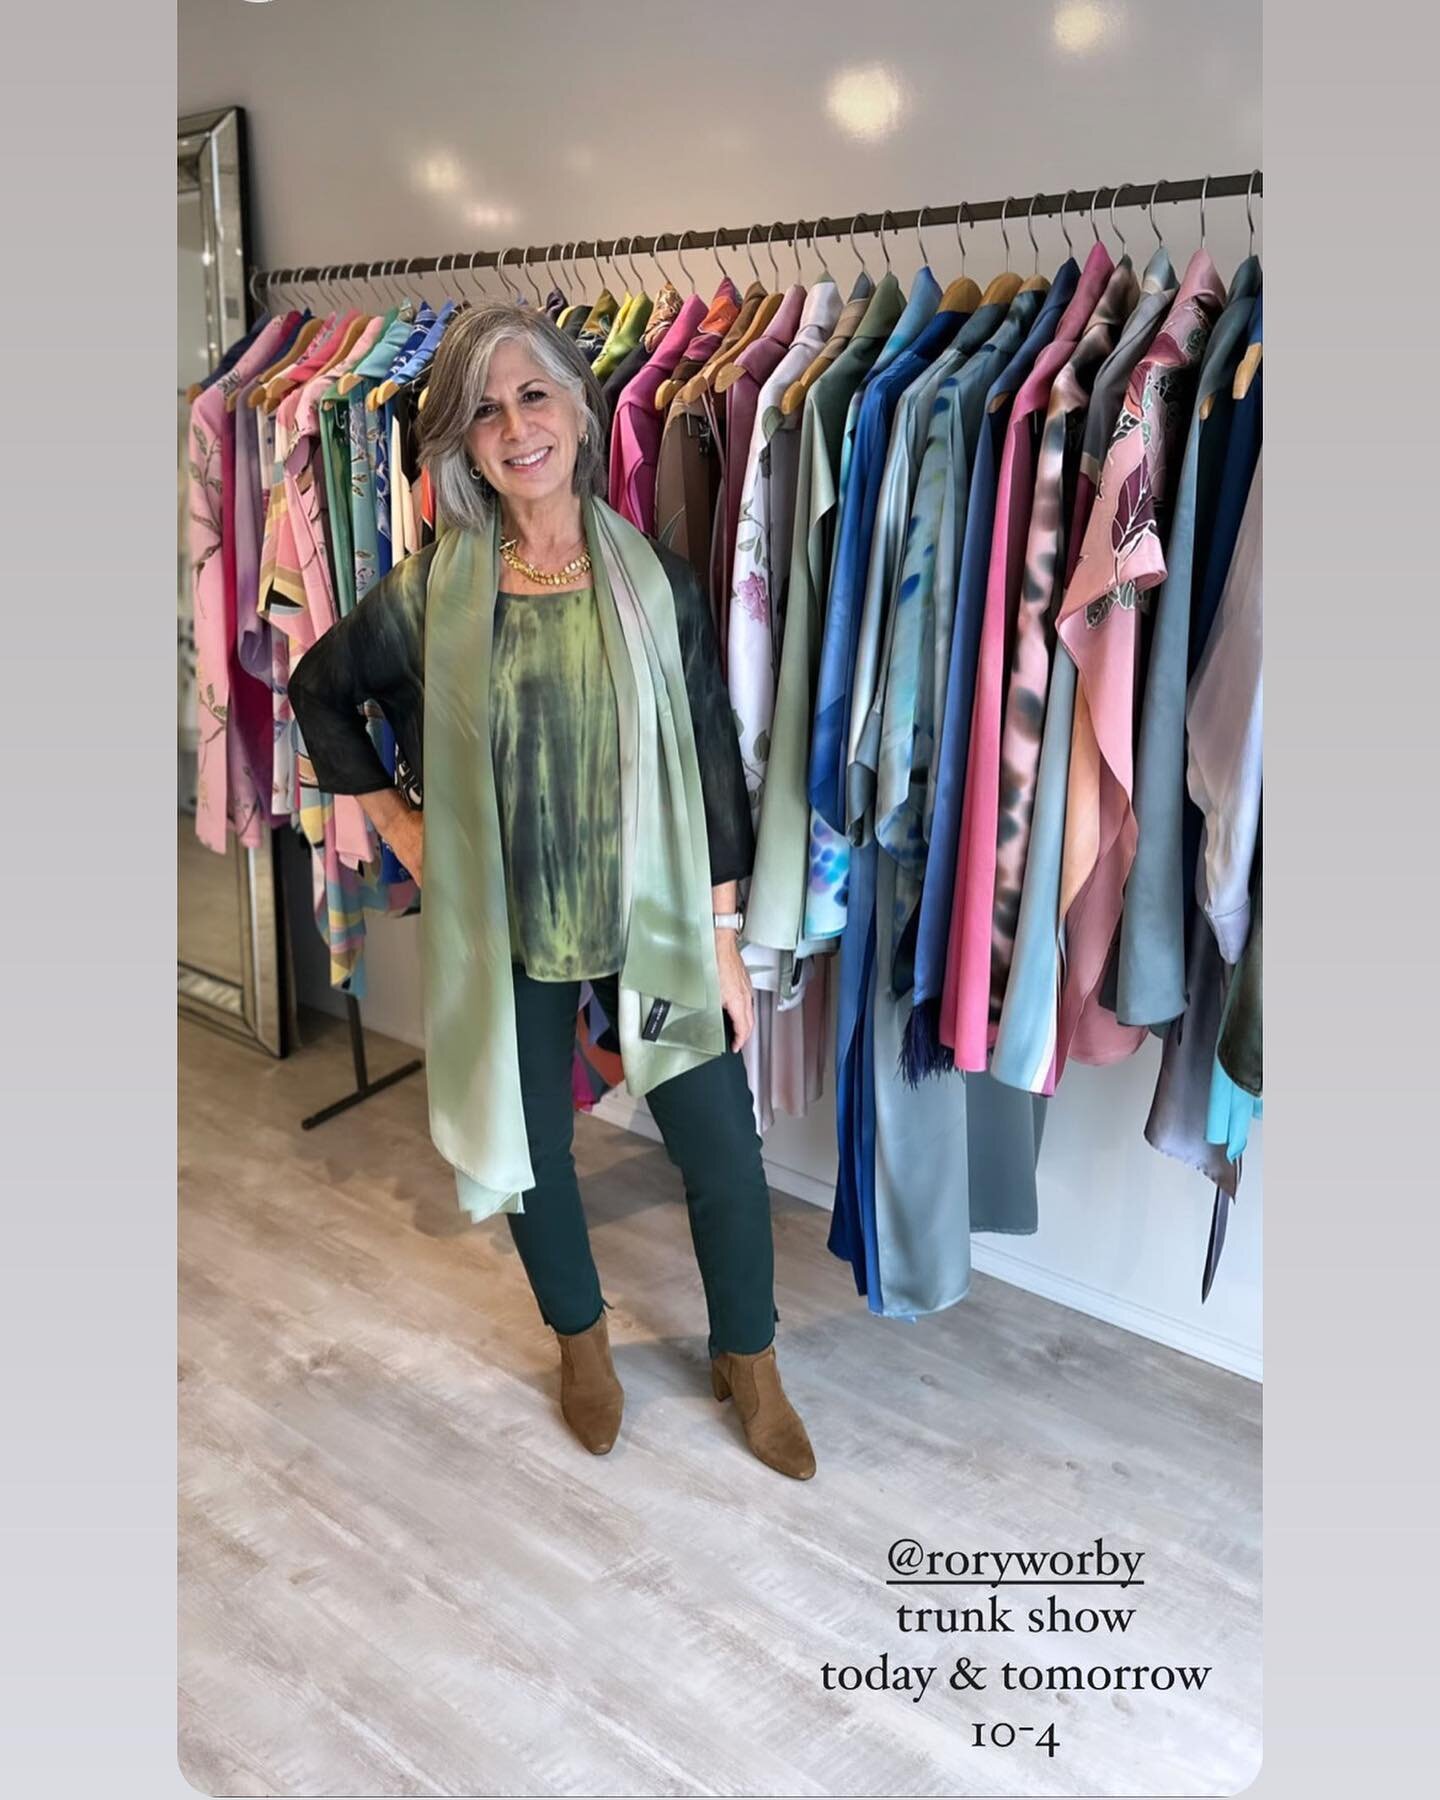 Today and tomorrow @katiefongcollection 10:00-4:00
Start your holiday shopping 🛍️ with me! One-of-a-kind handpainted silks make the perfect 💝 gift! 

Are you traveling somewhere warm this holiday season? We&rsquo;ve got the perfect sarongs,wraps an